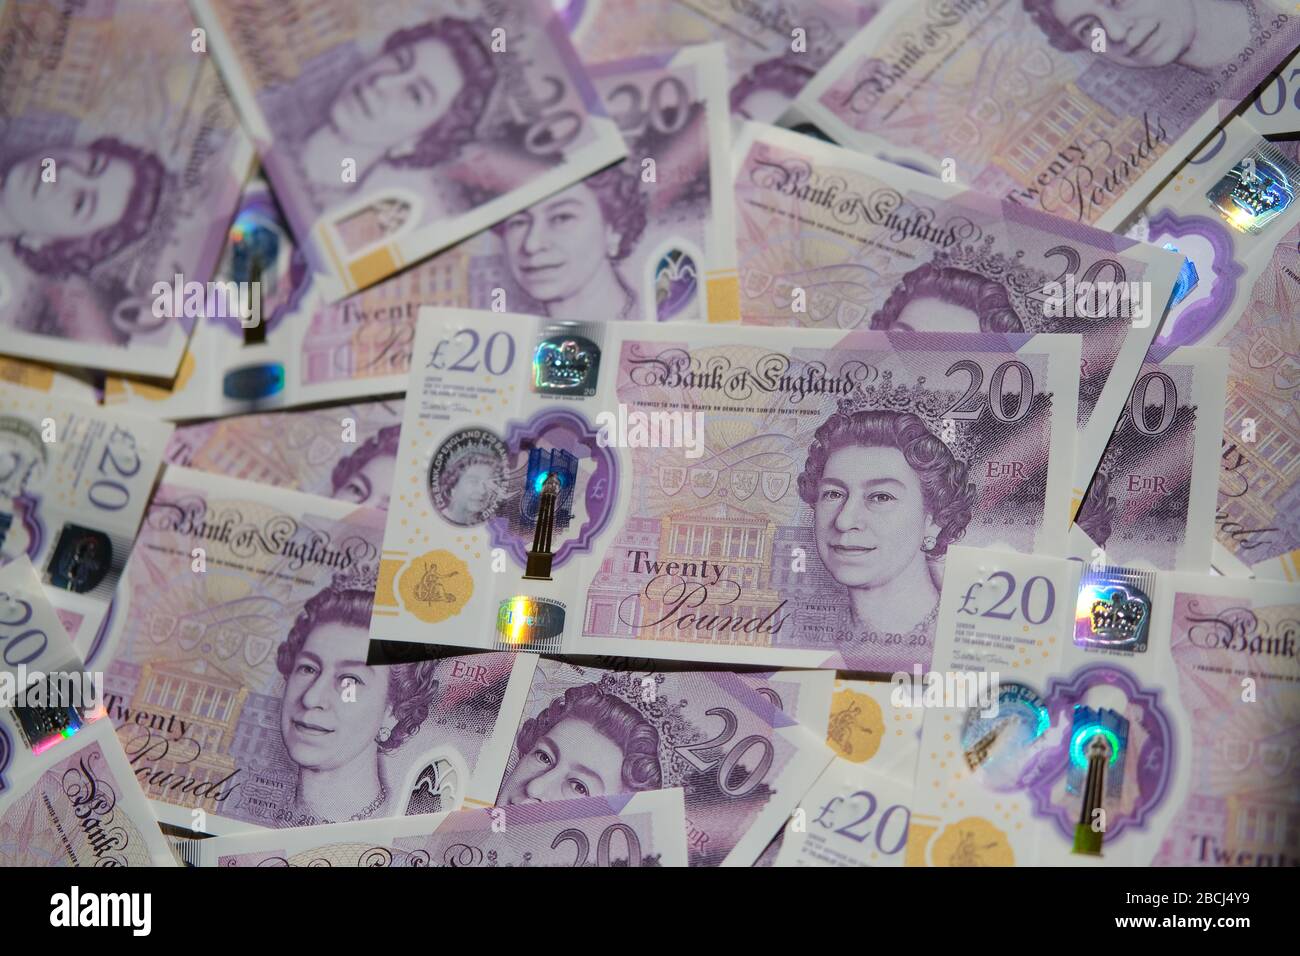 The new 20 pound polymer notes. Flat lay photo. The new banknotes released in the United Kingdom in February 2020. Stock Photo